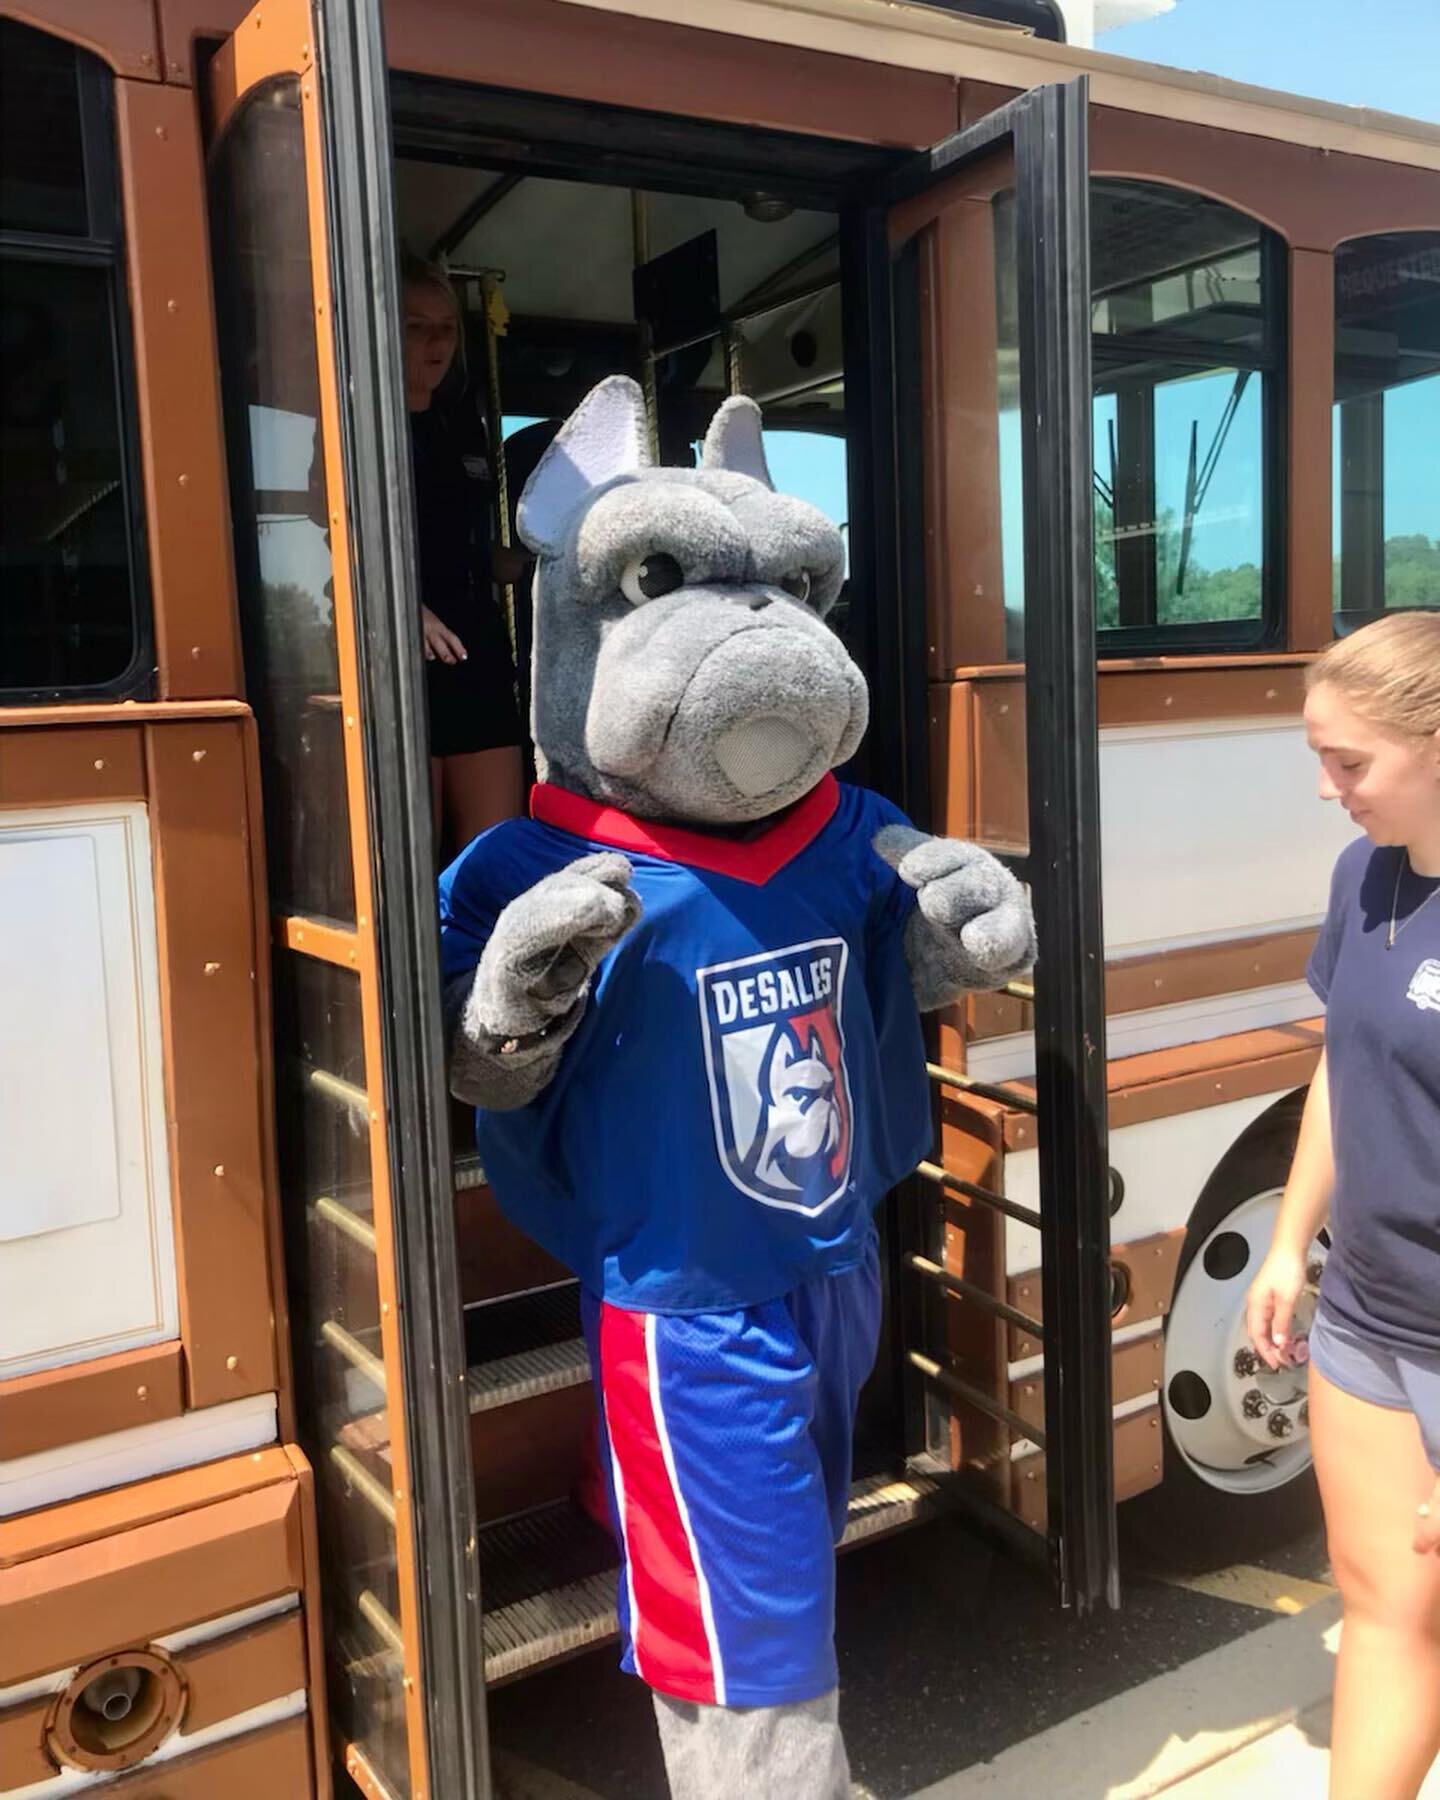 We normally don&rsquo;t allow pets in the trolley, but we made an exception for our DeSales University Bulldogs 🐶 Spent our Sunday at @desalesuniversity shuttling the newest students on their move-in day! Good luck Class of 2027! 🚃
. 
. 
#pabride #